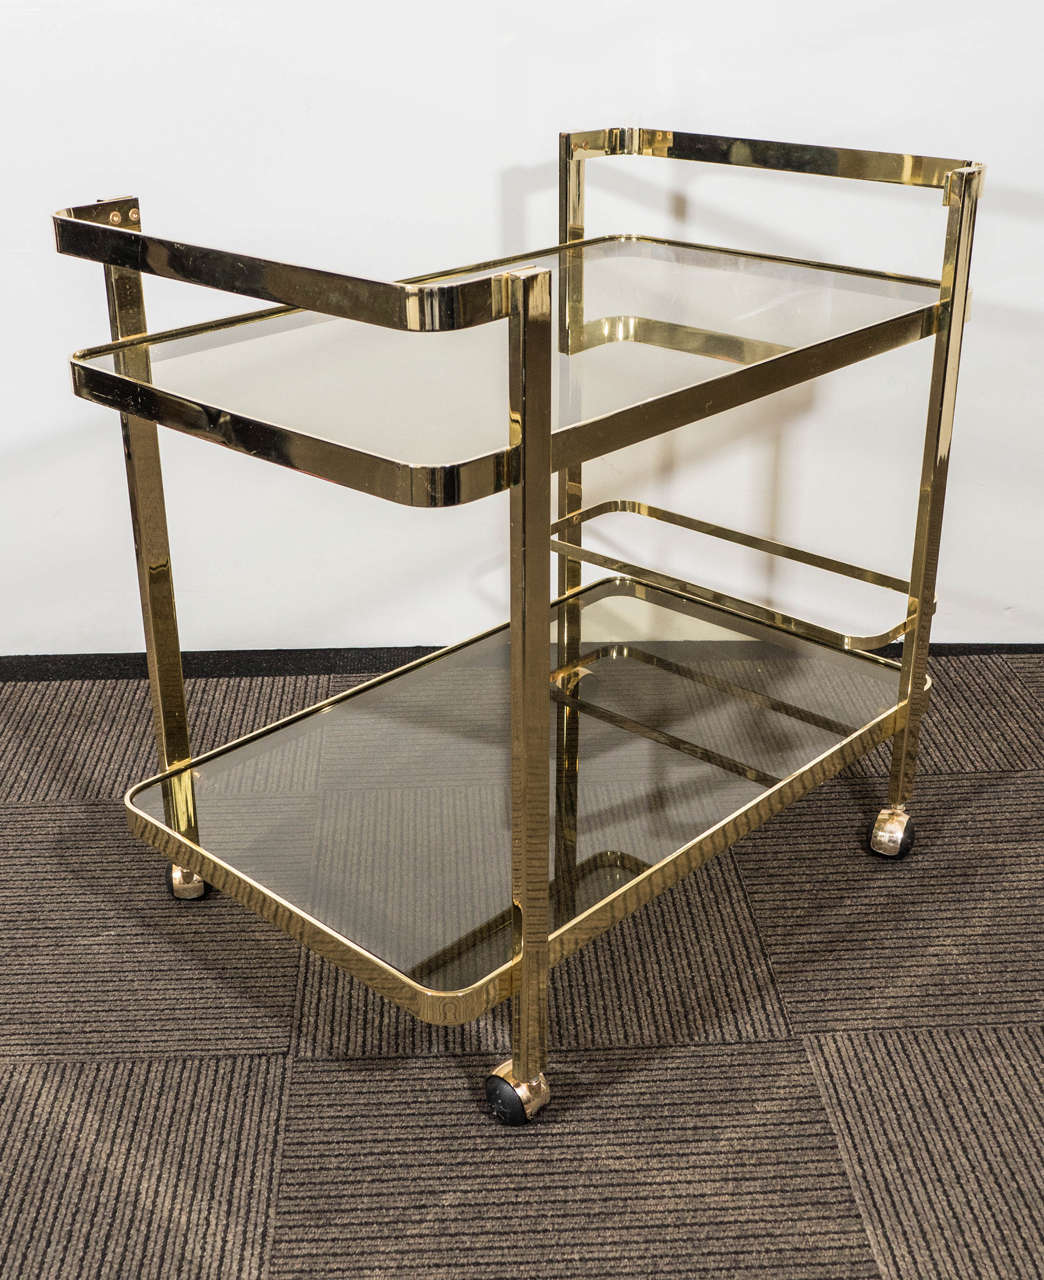 A vintage two-tier bar cart, produced circa 1970's, in heavy brass stock, with smoked glass inset shelves and bottle rack, on caster wheels. Excellent vintage condition, consistent with use and age.